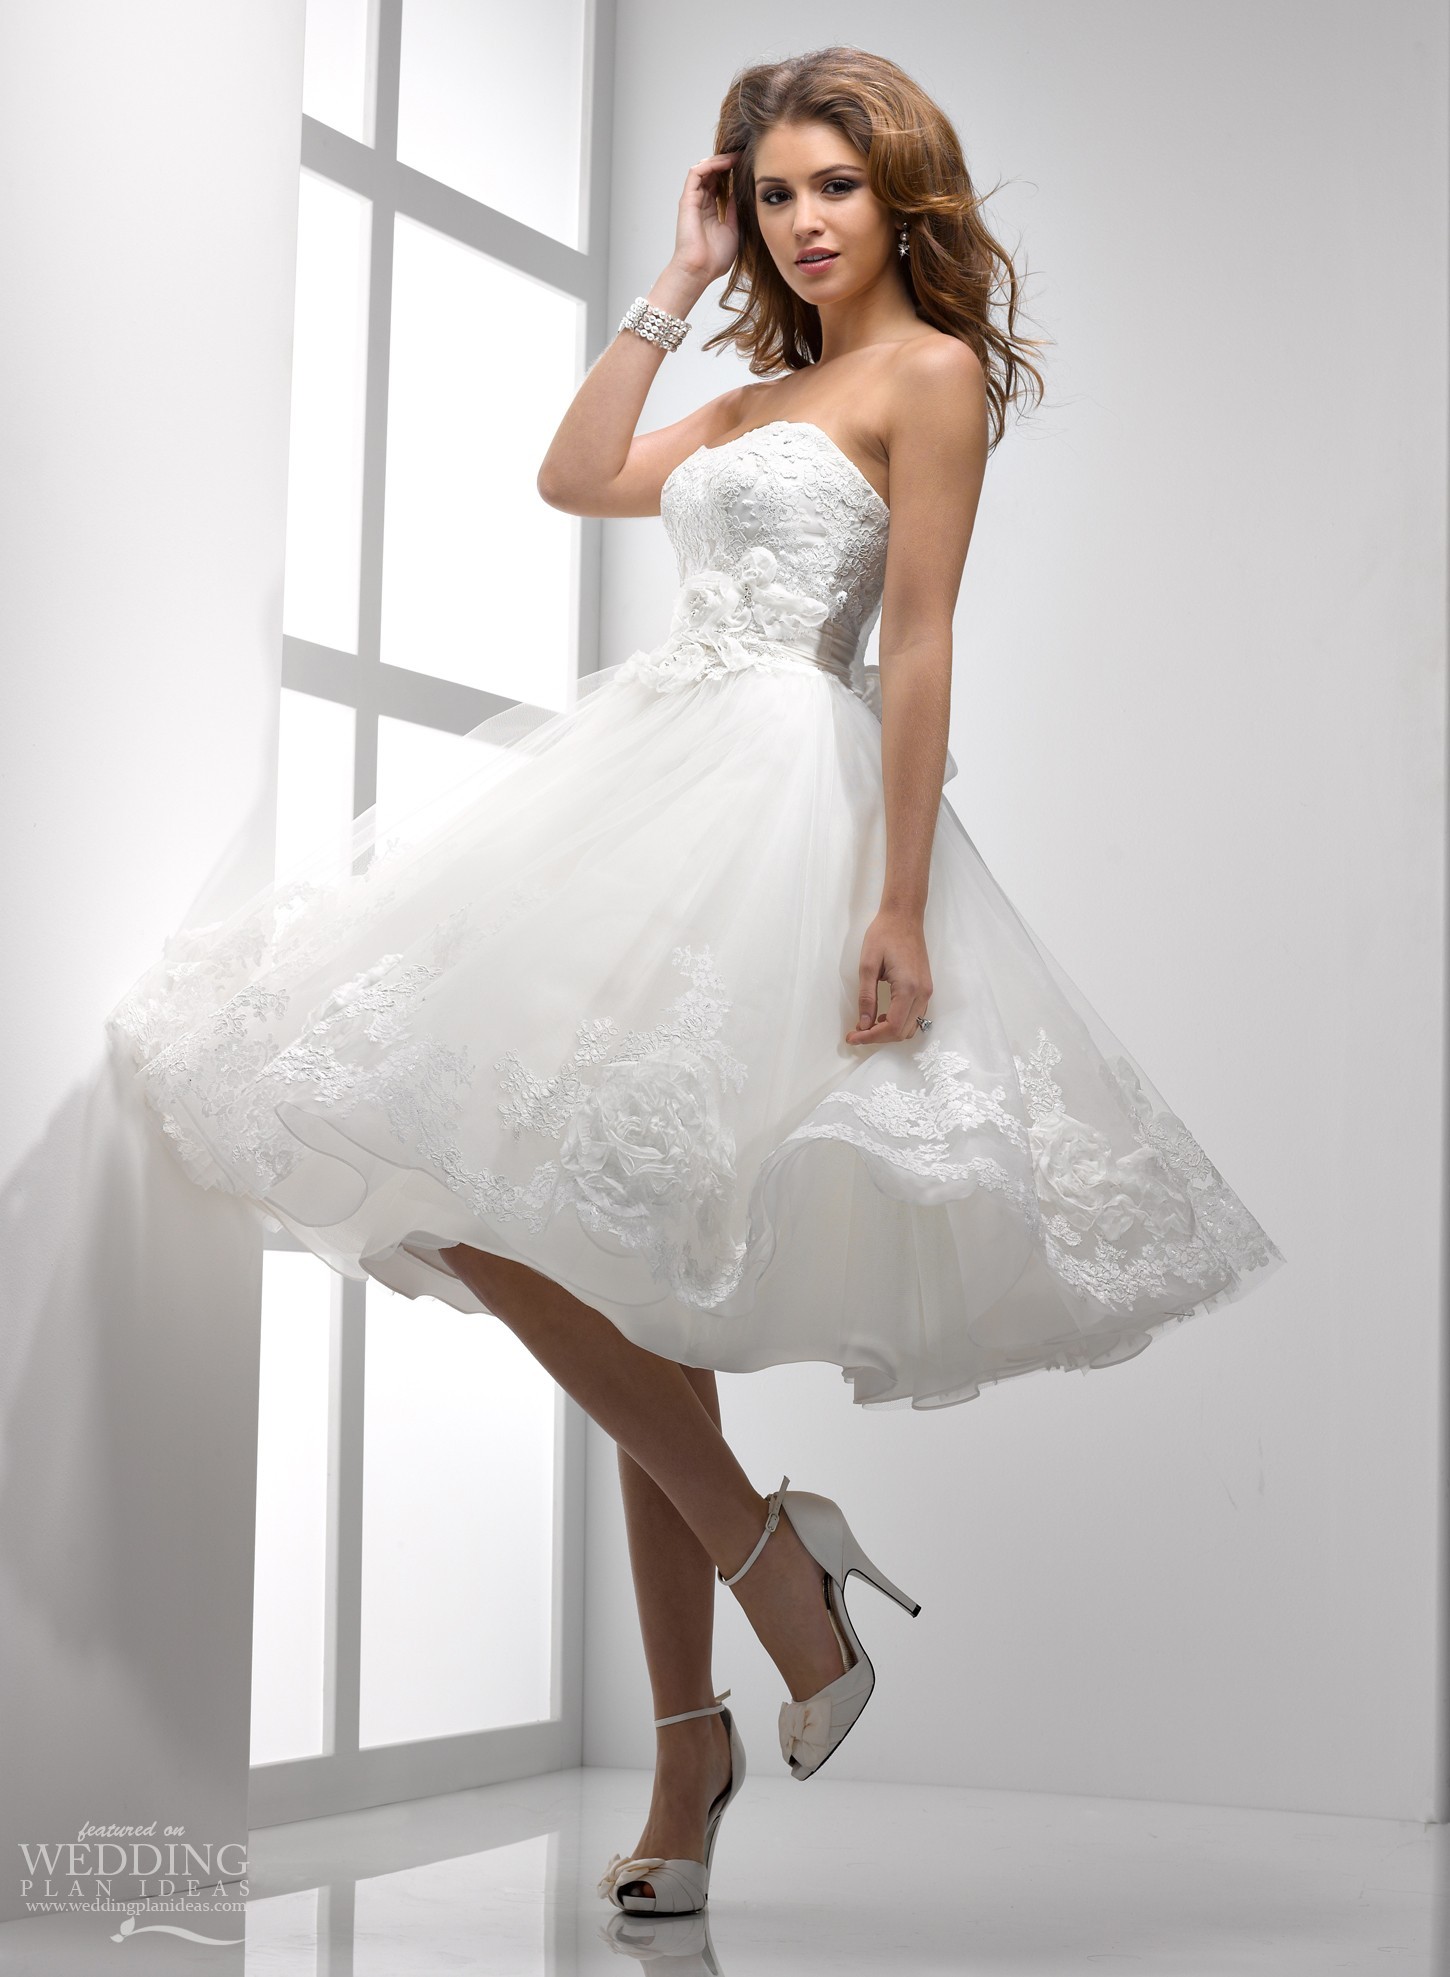 Flowing Tulle and E mbellished Lace Wedding Dresses